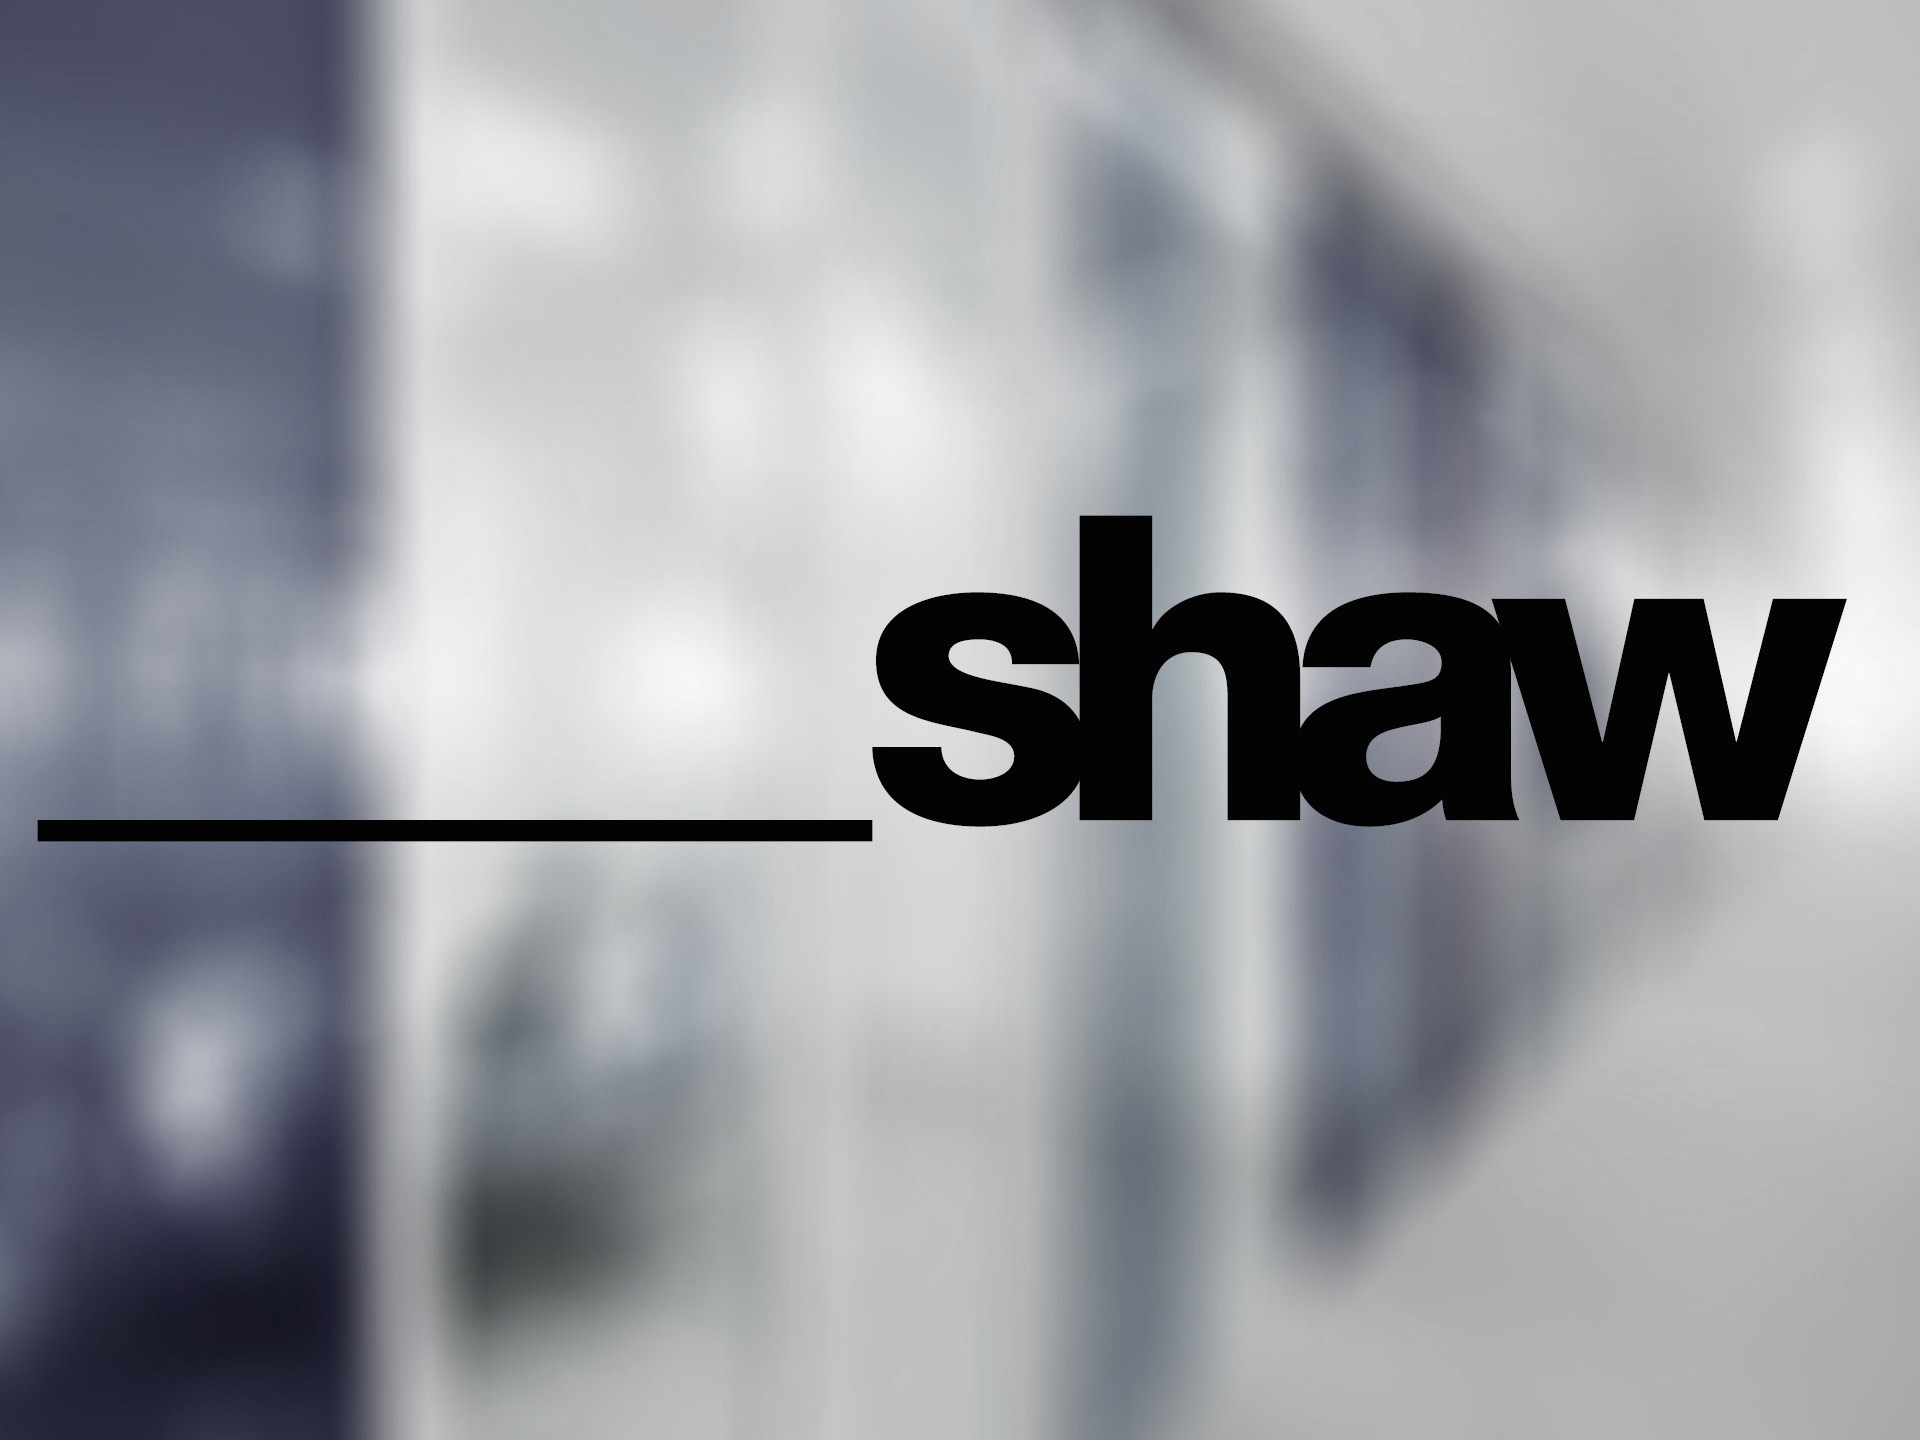 Profile and presentation materials for workplace design consultants Shaw.